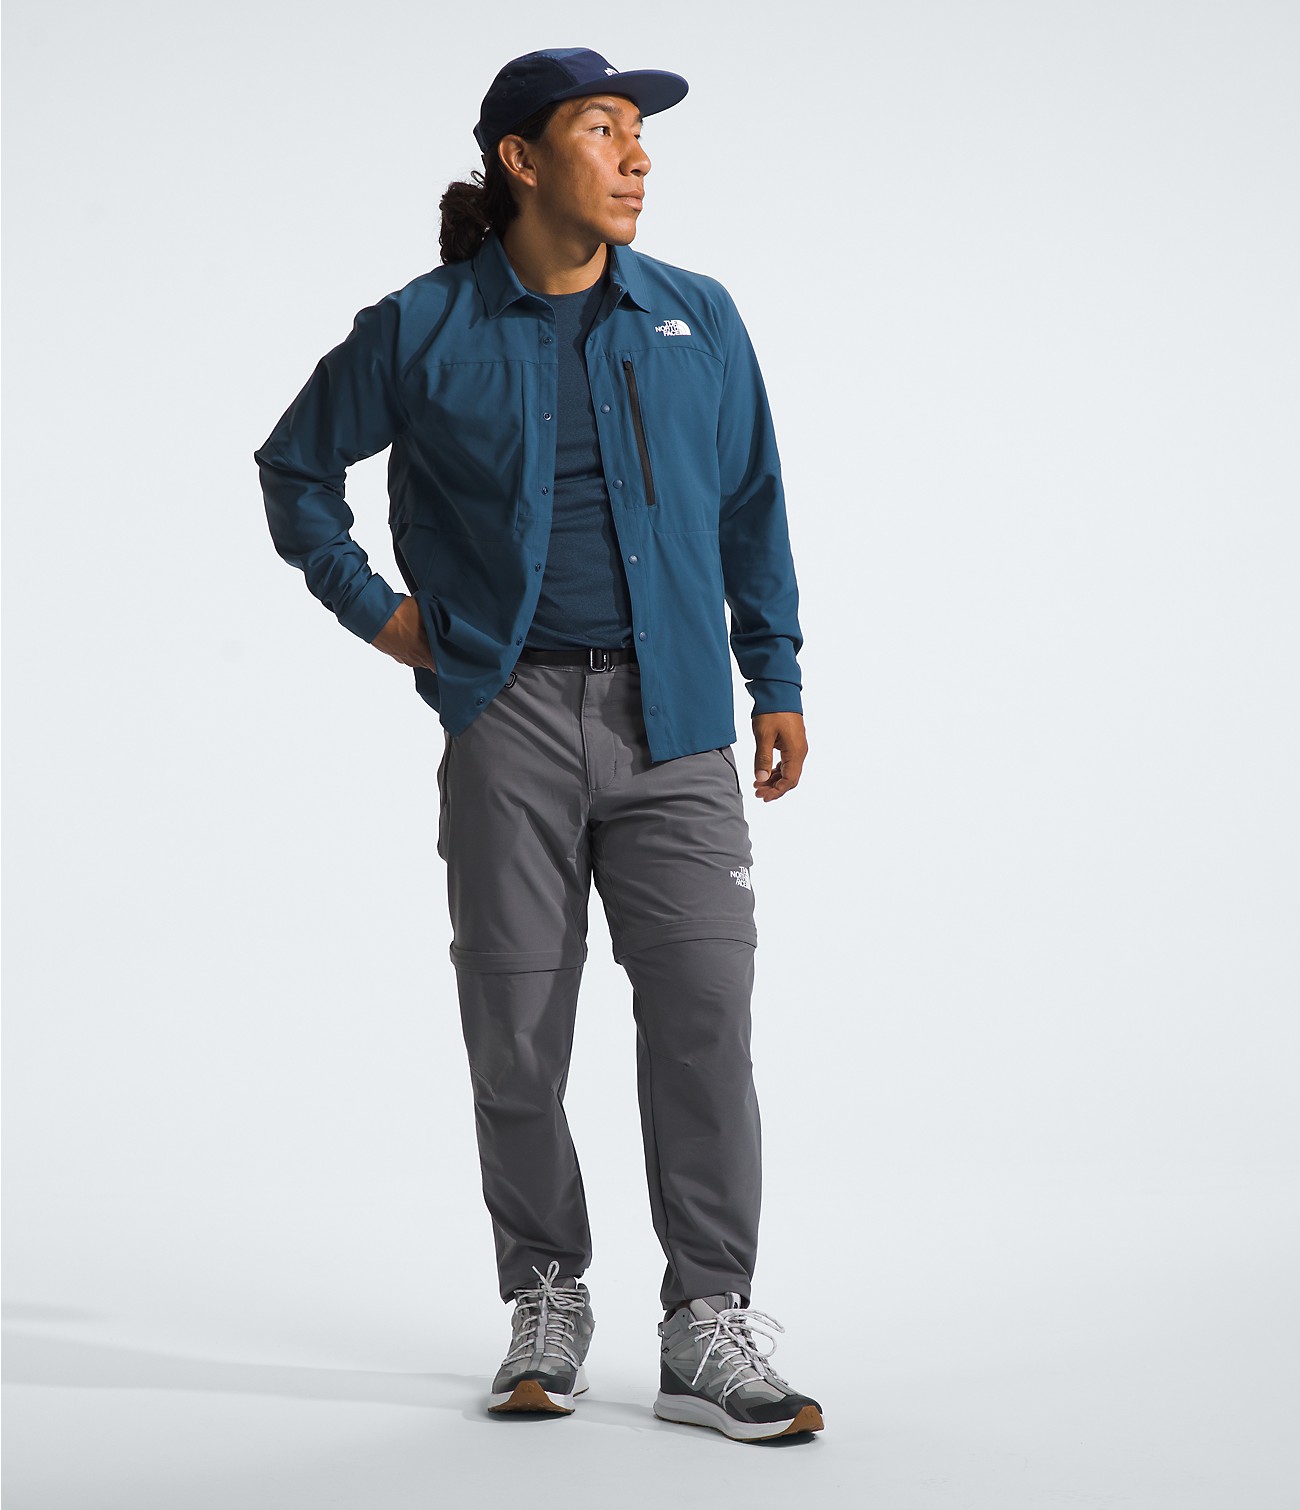 Men’s First Trail UPF Long-Sleeve Shirt | The North Face